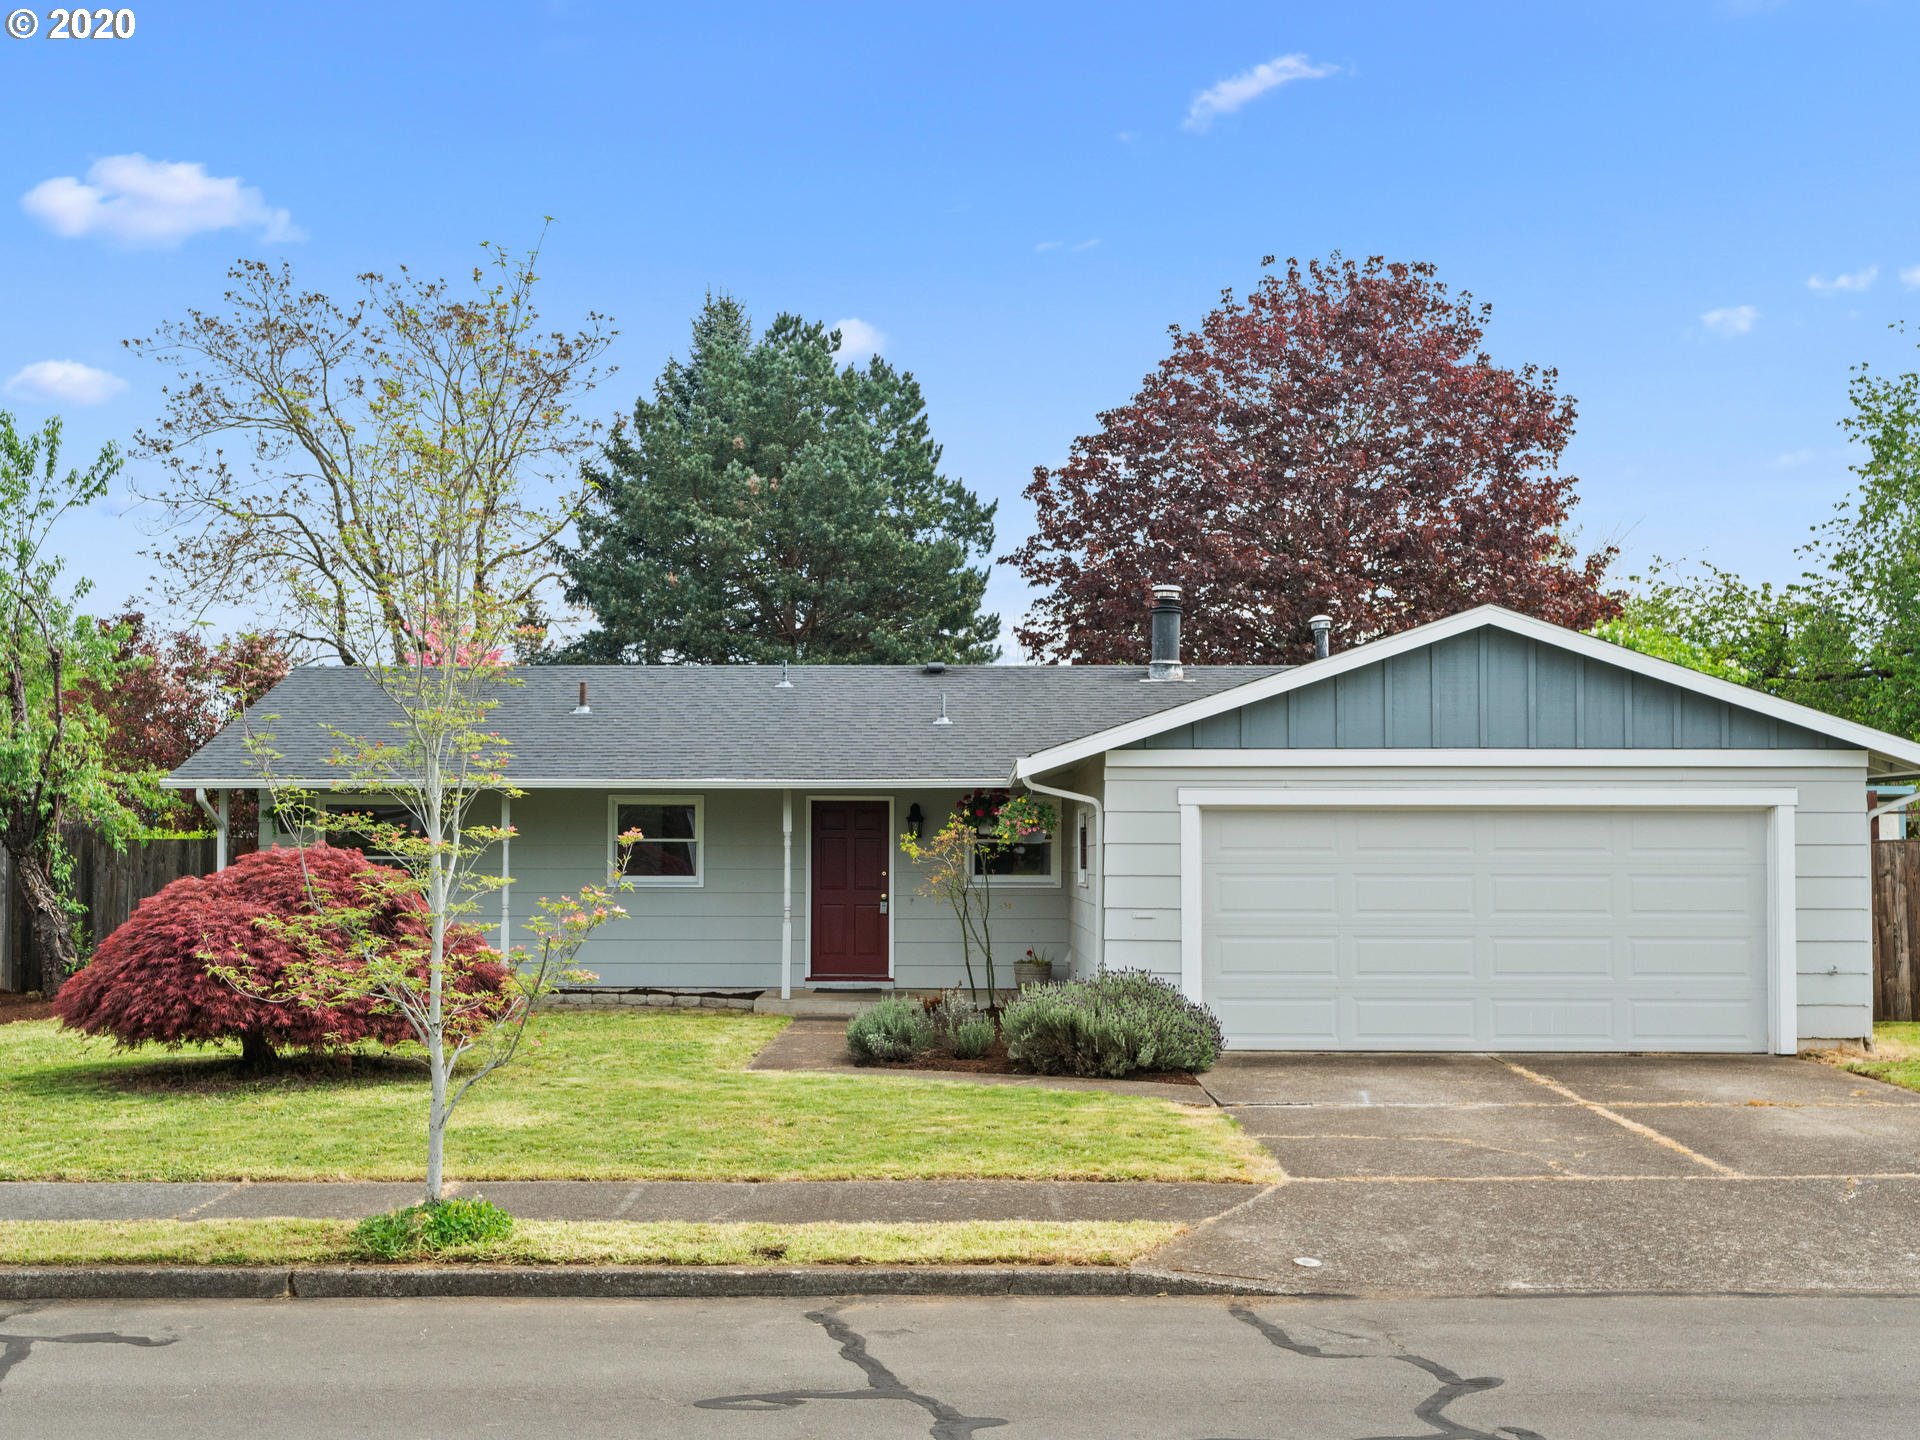 130 SE 193RD AVE (1 of 22)